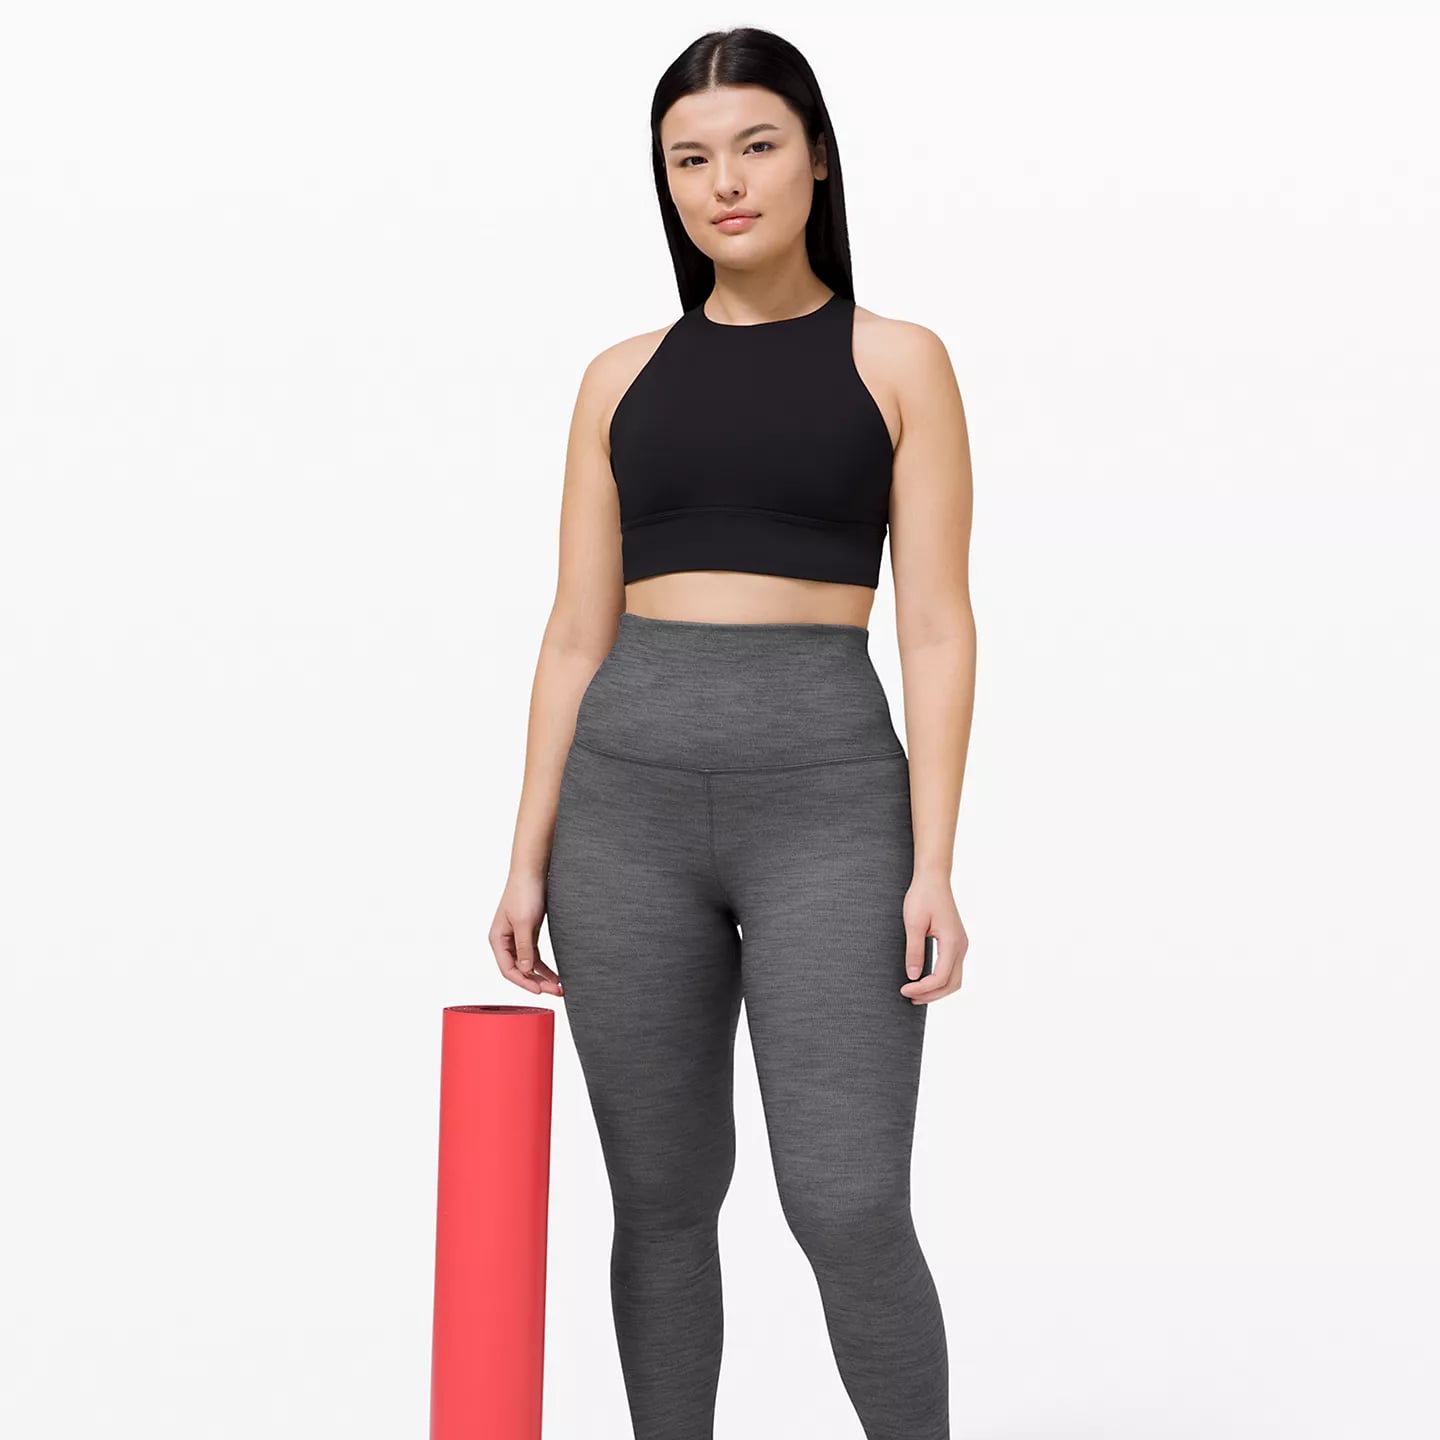 Best Sale Items From Lululemon We Made Too Much Section